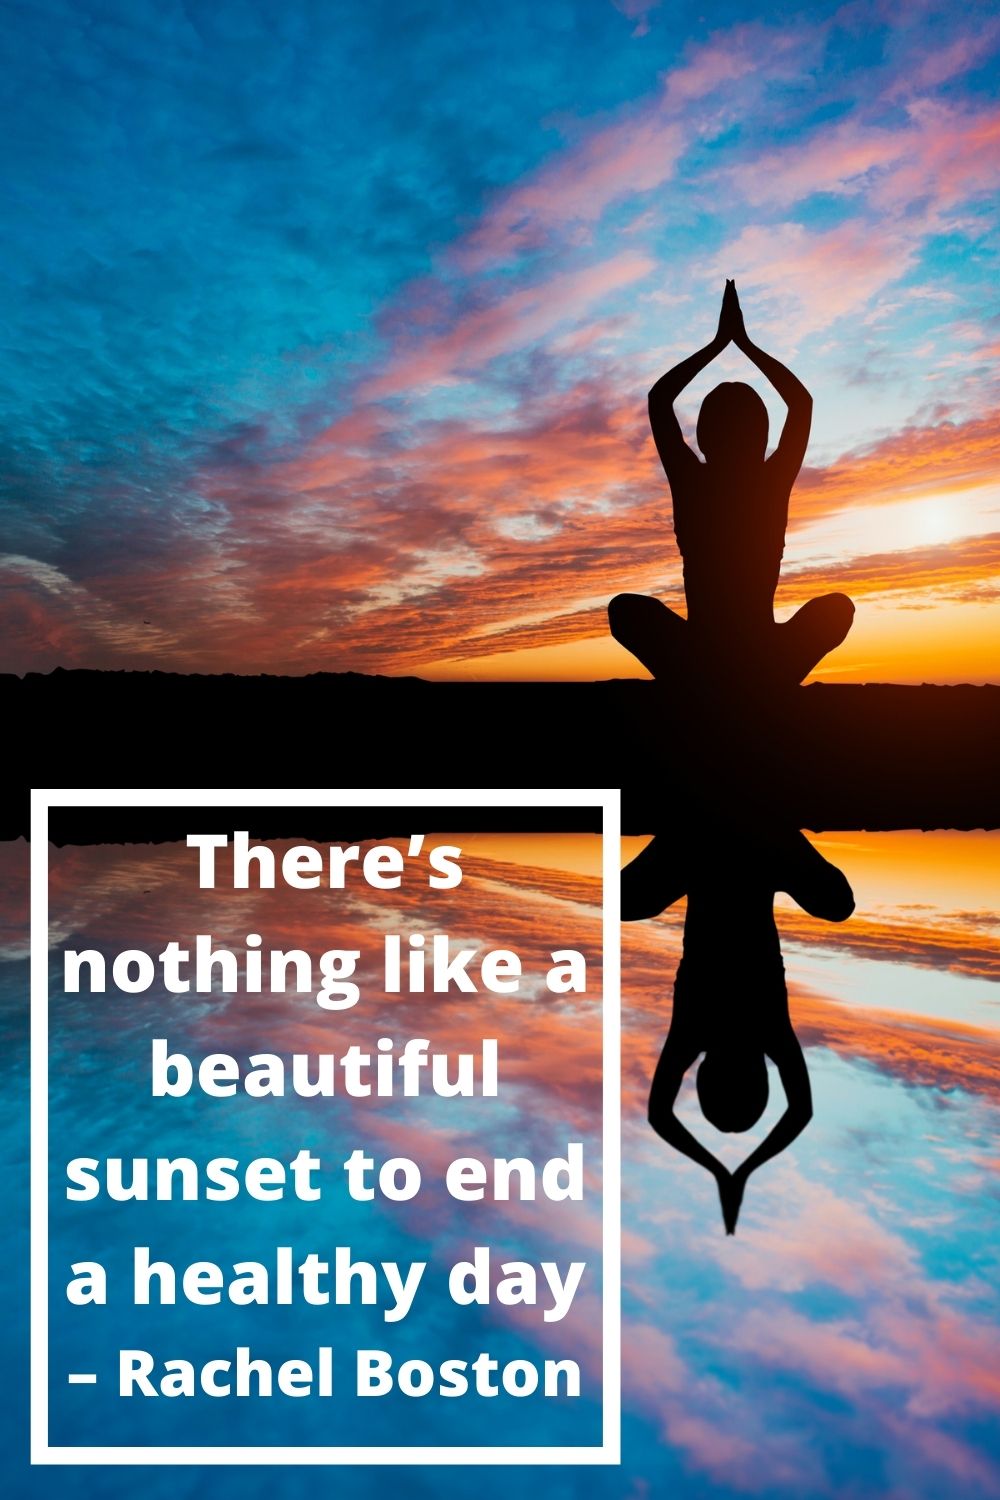 There’s nothing like a beautiful sunset to end a healthy day. – Rachel Boston